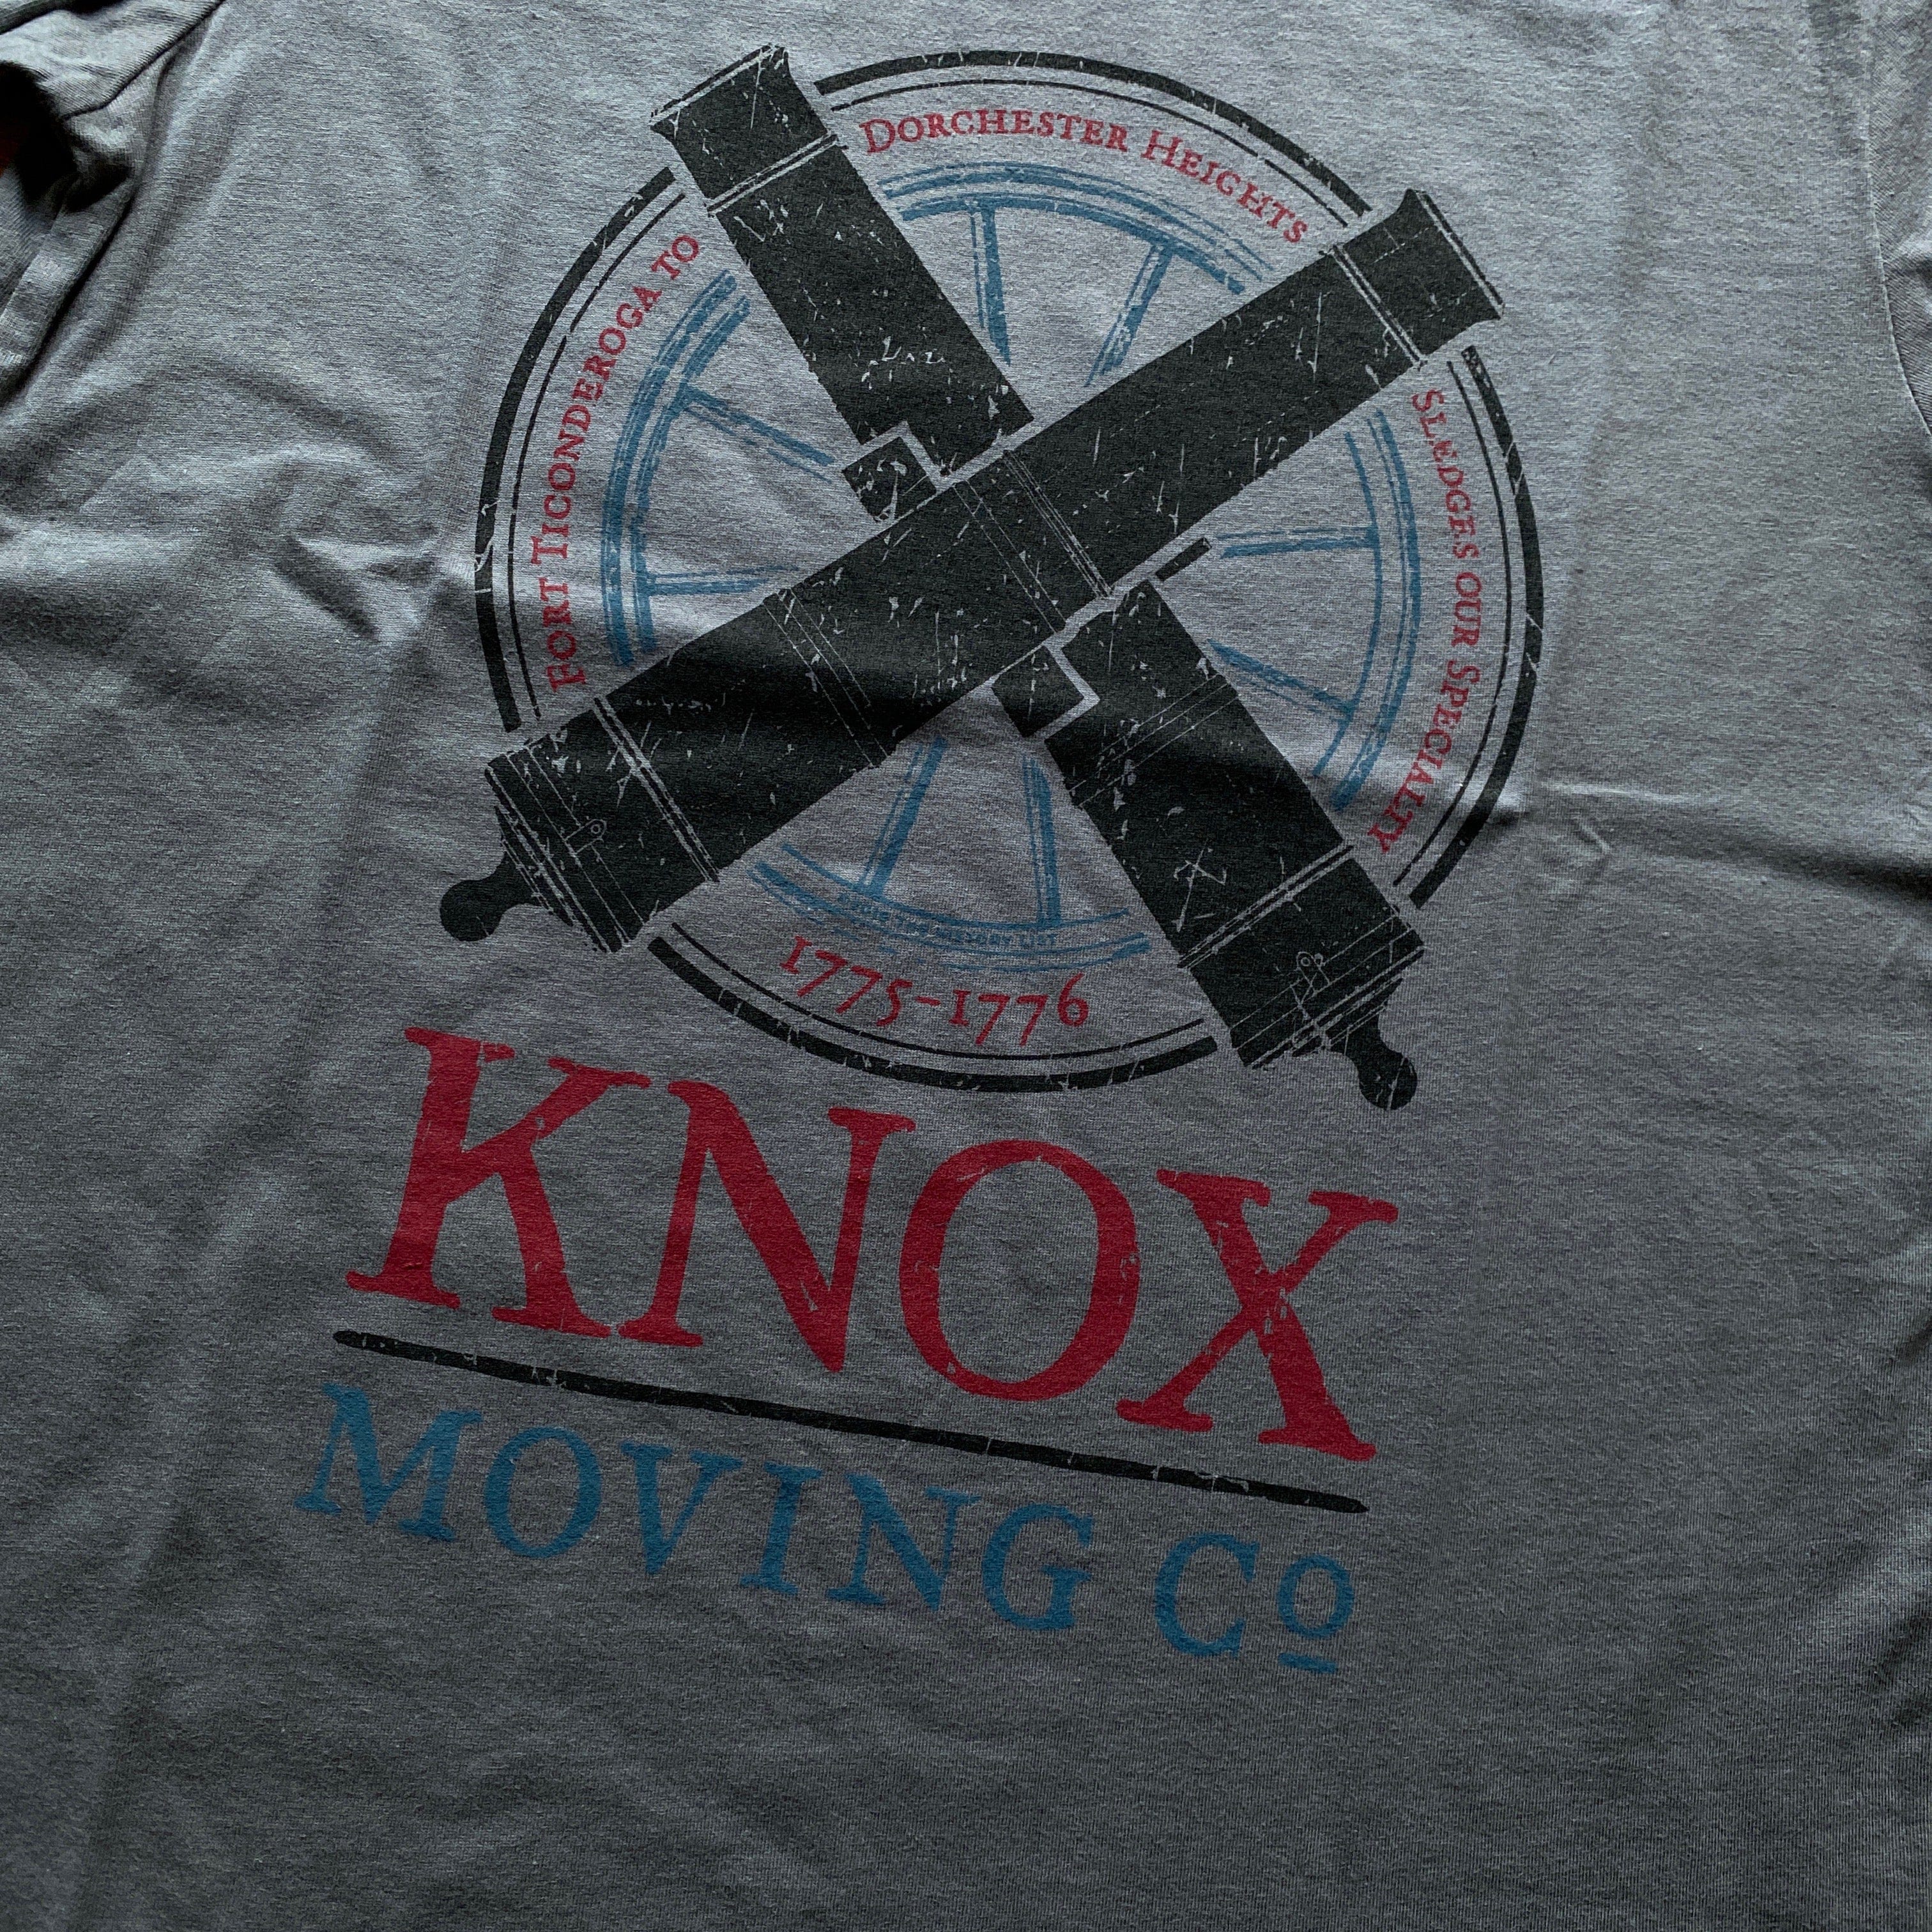 Knox Moving Co. Long-sleeved shirt – The History List